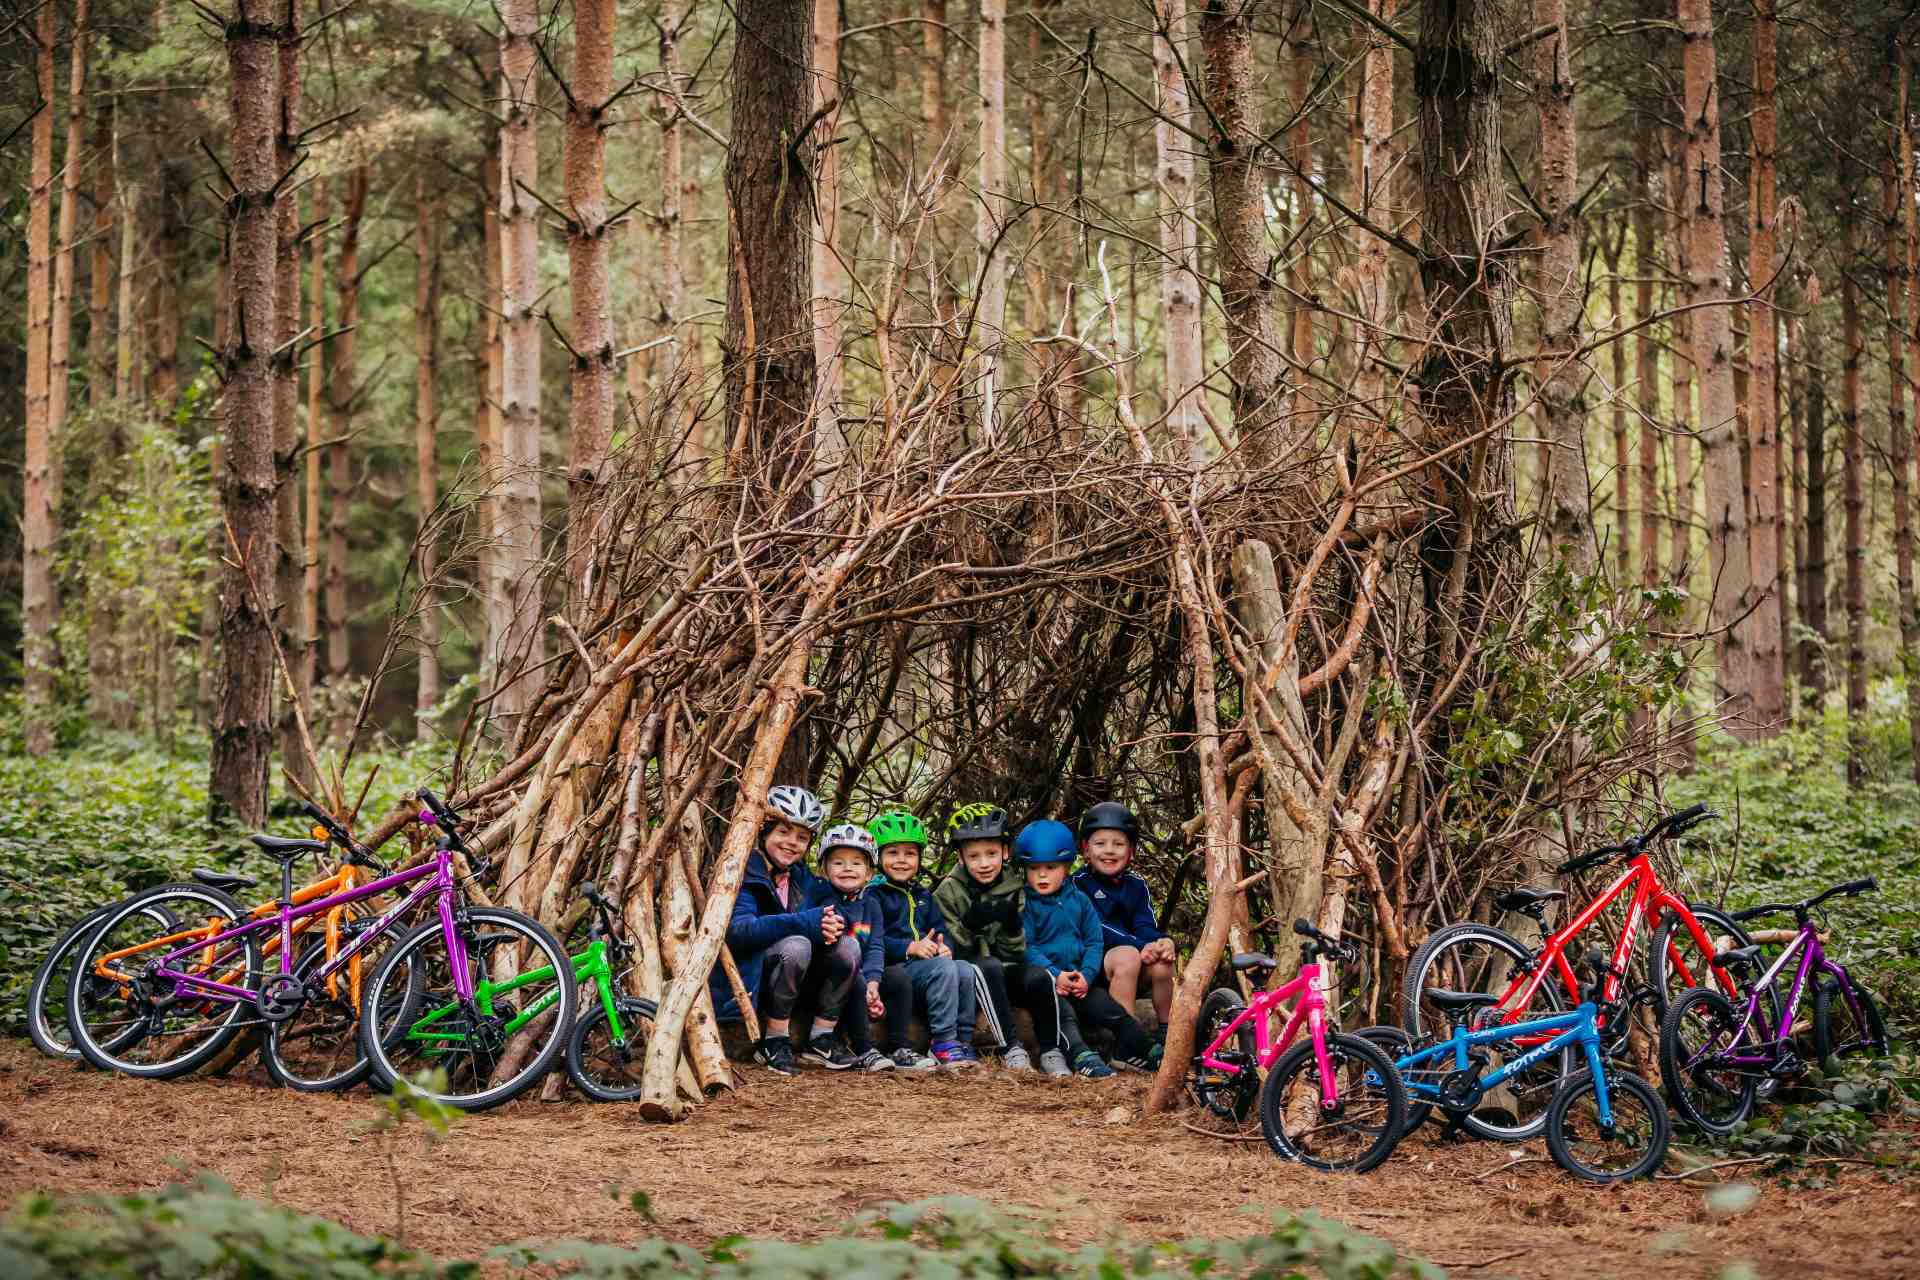 A group of young cyclists gather together in the forest in a den made out of branches with their Forme Cubley and Kinder bikes nearby.